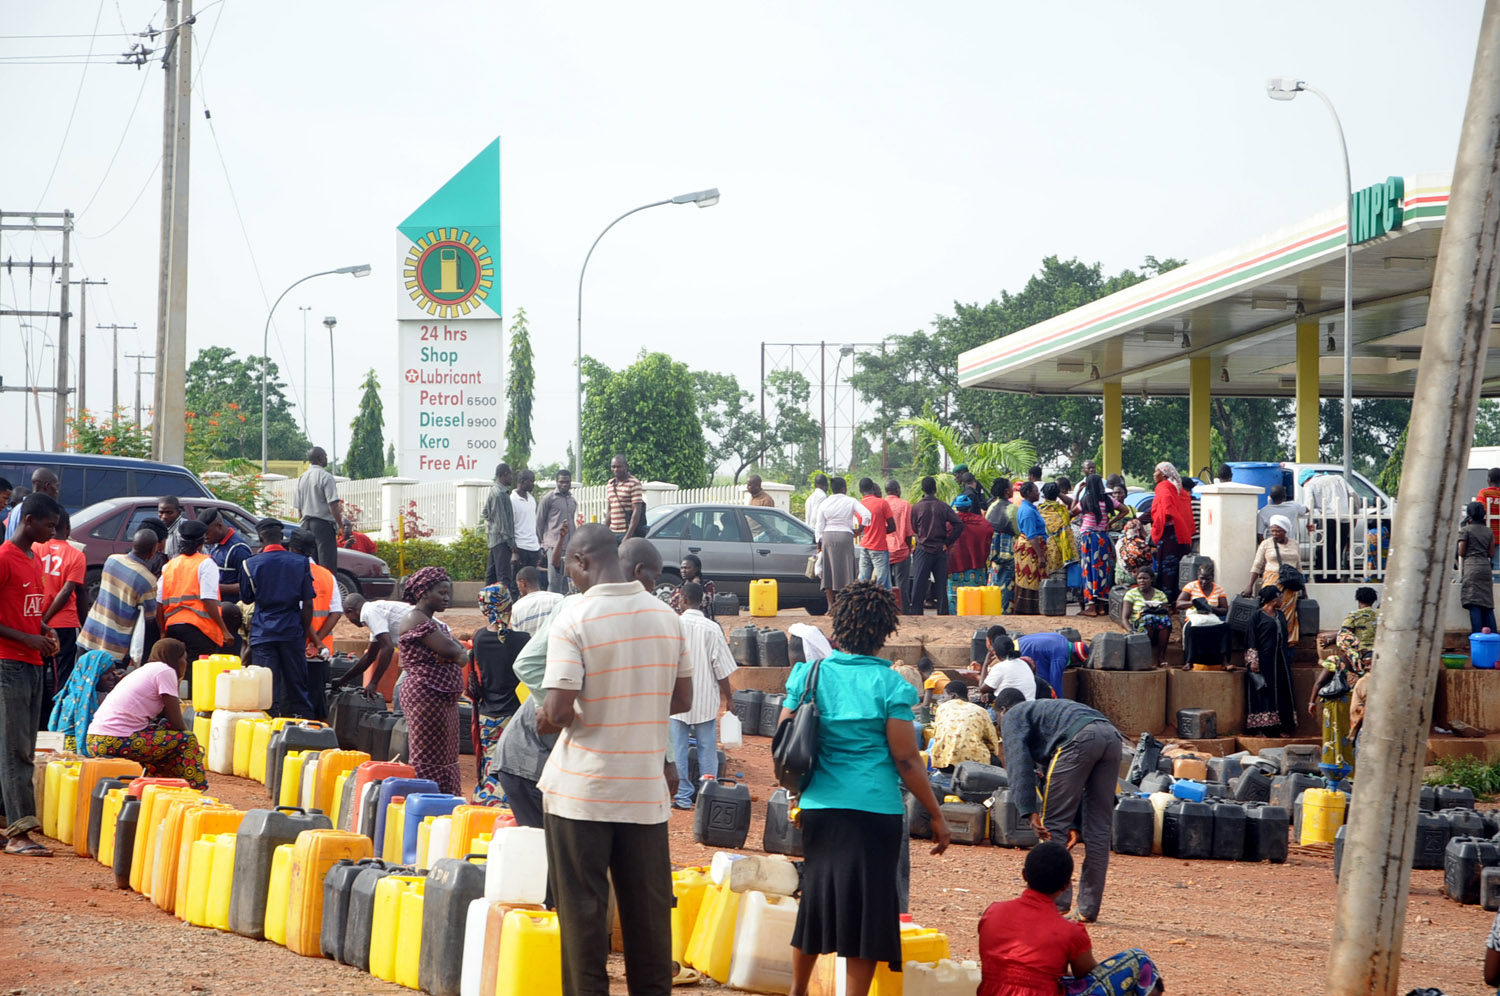 Fuel scarcity rocks parts of Lagos, as filling stations hoard product